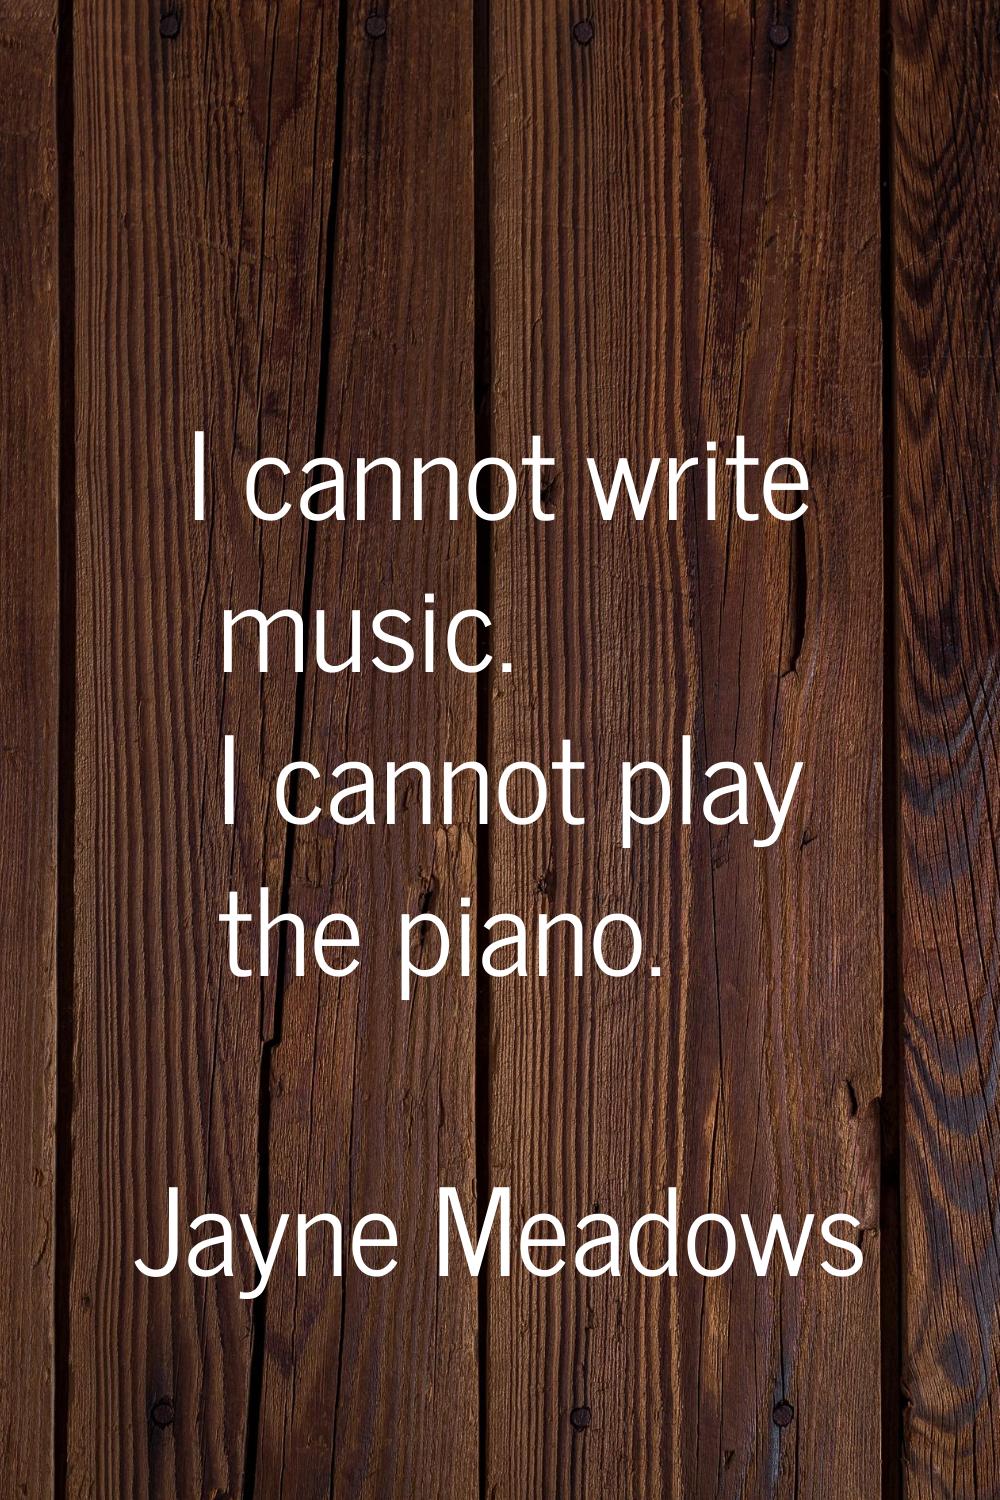 I cannot write music. I cannot play the piano.